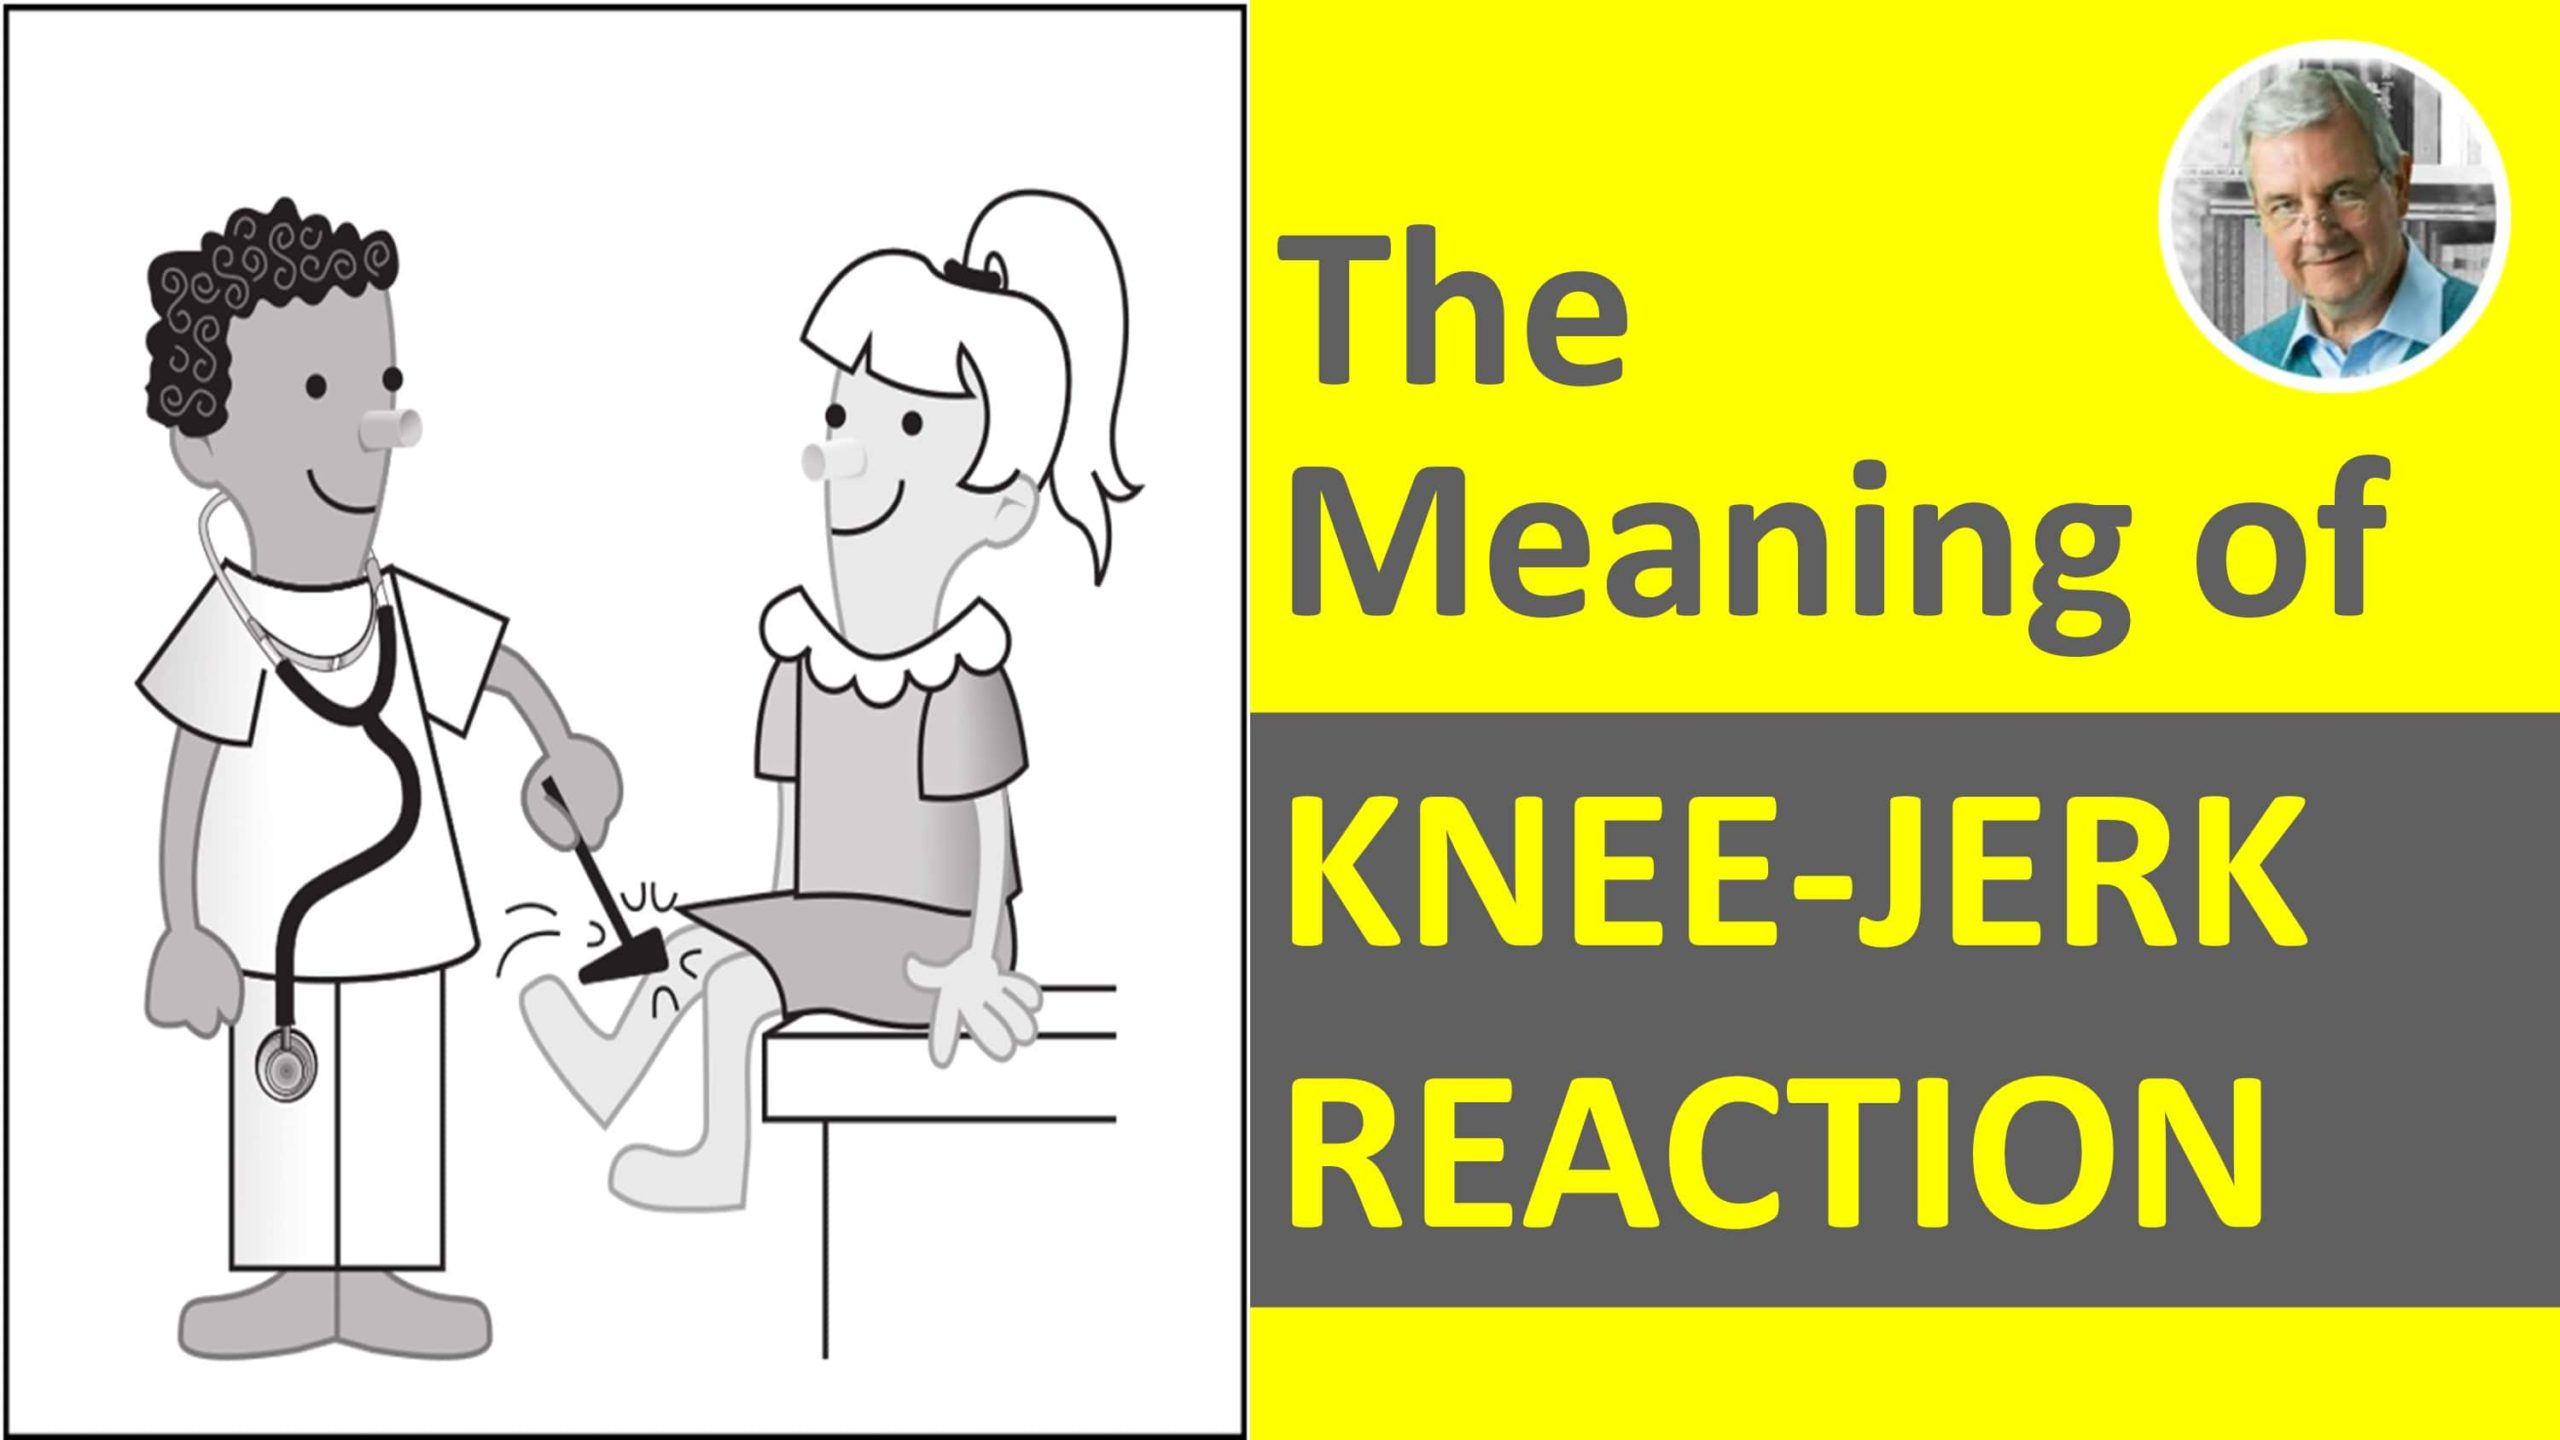 knee-jerk reaction examples - meaning